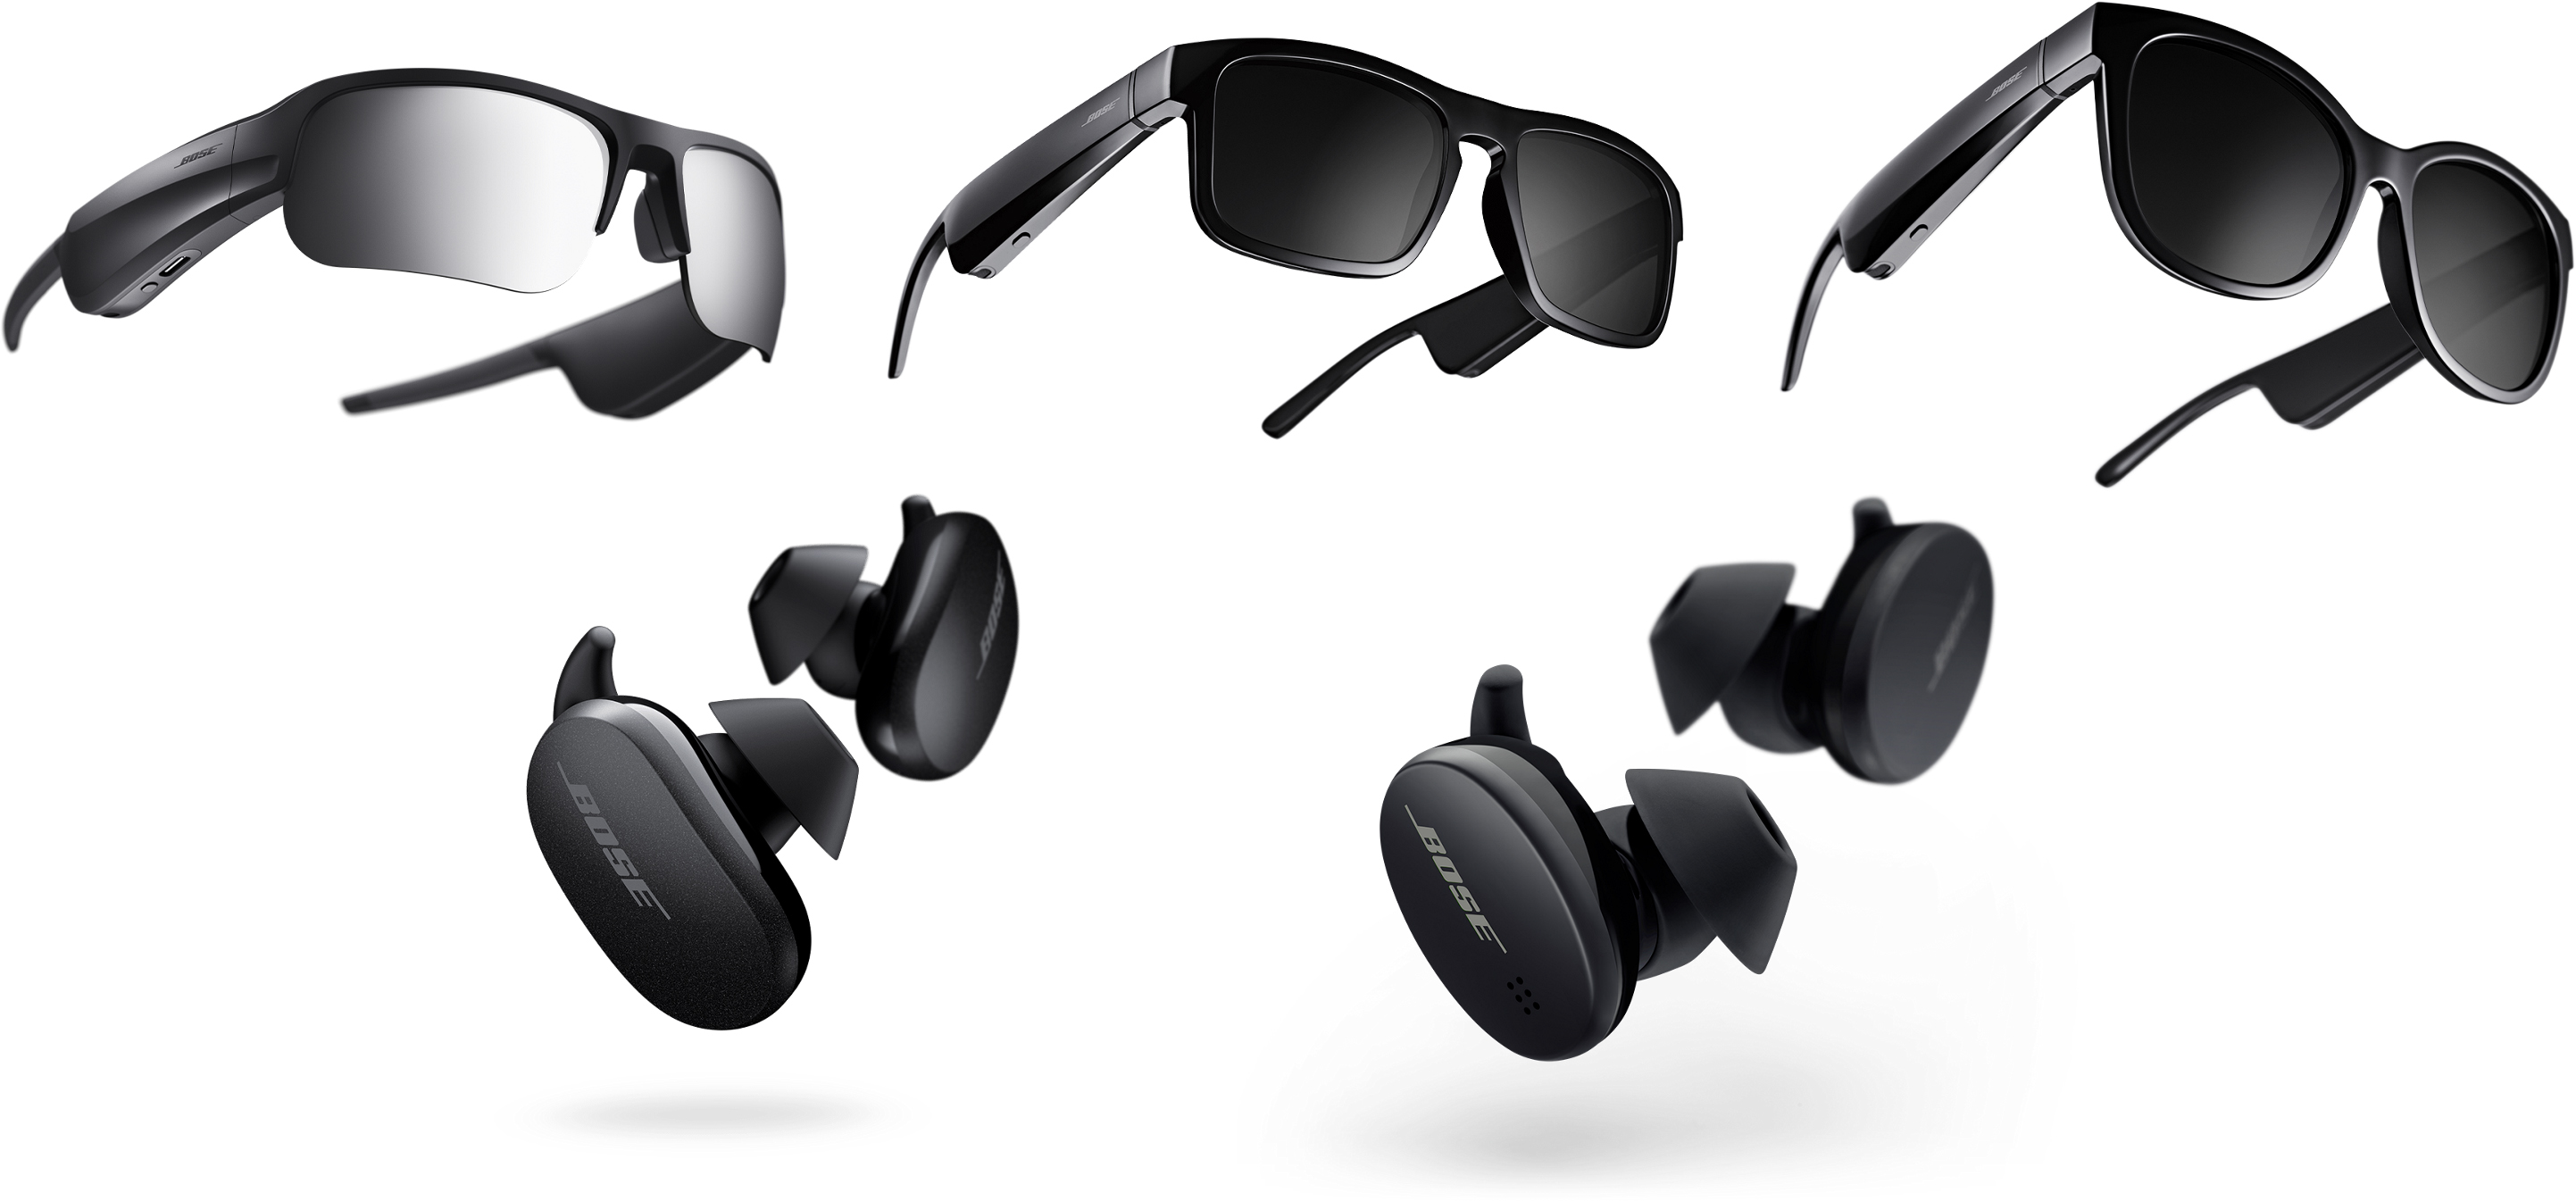 Bose update their sunglasses and earbuds range